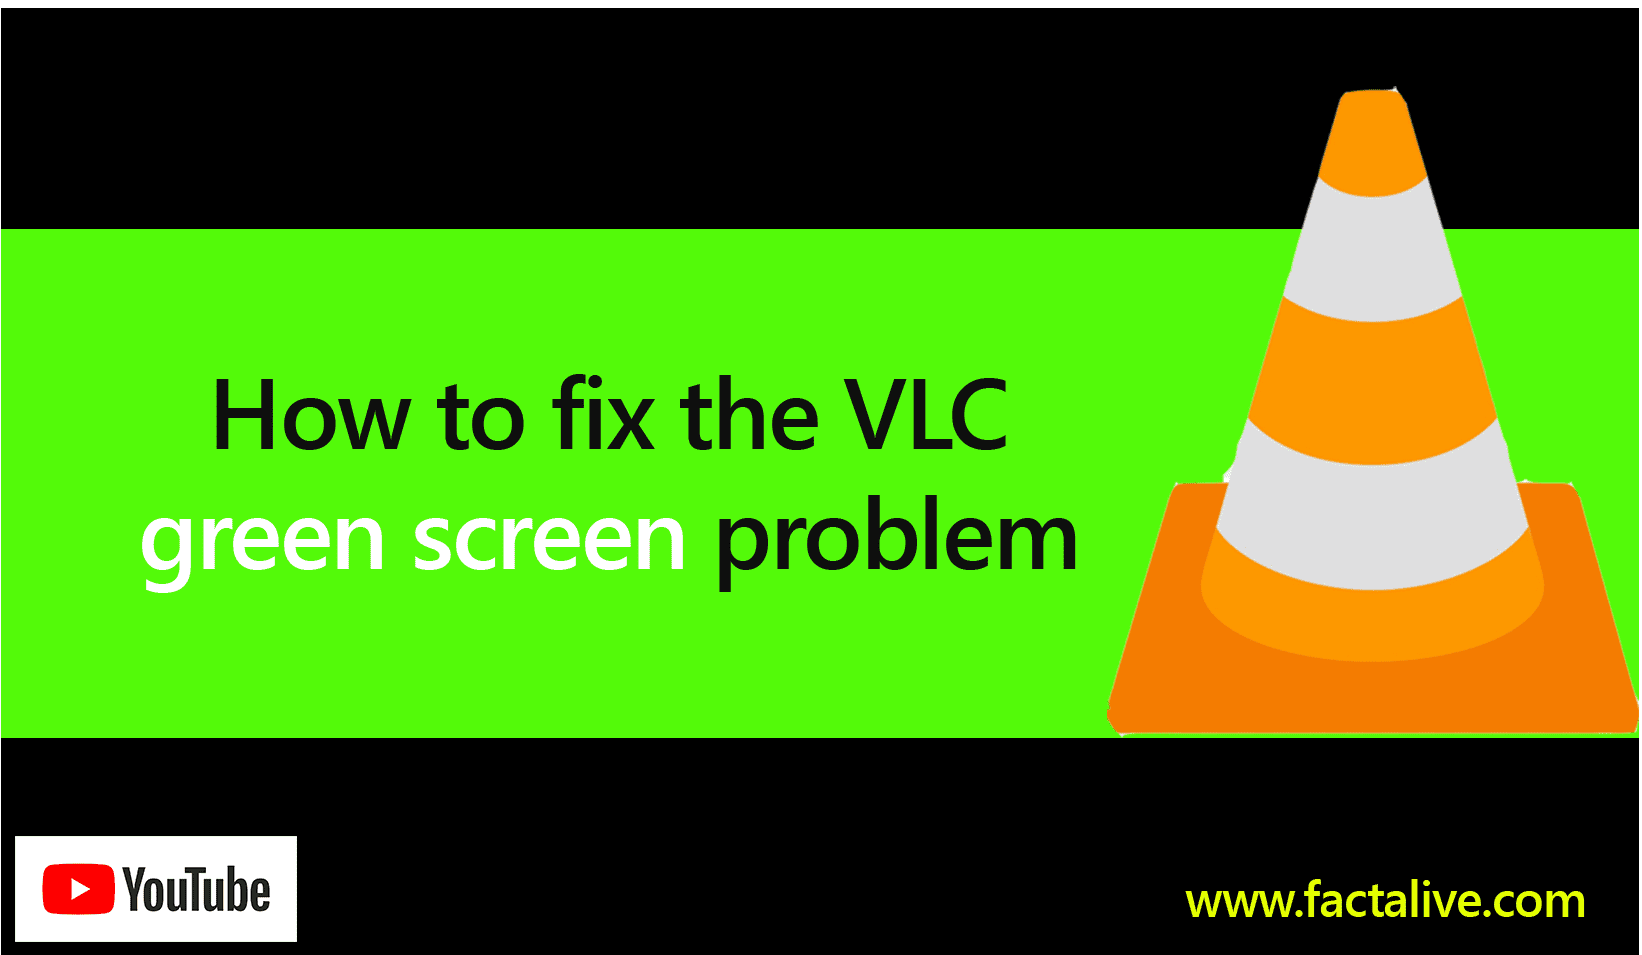 How to fix the VLC green screen problem